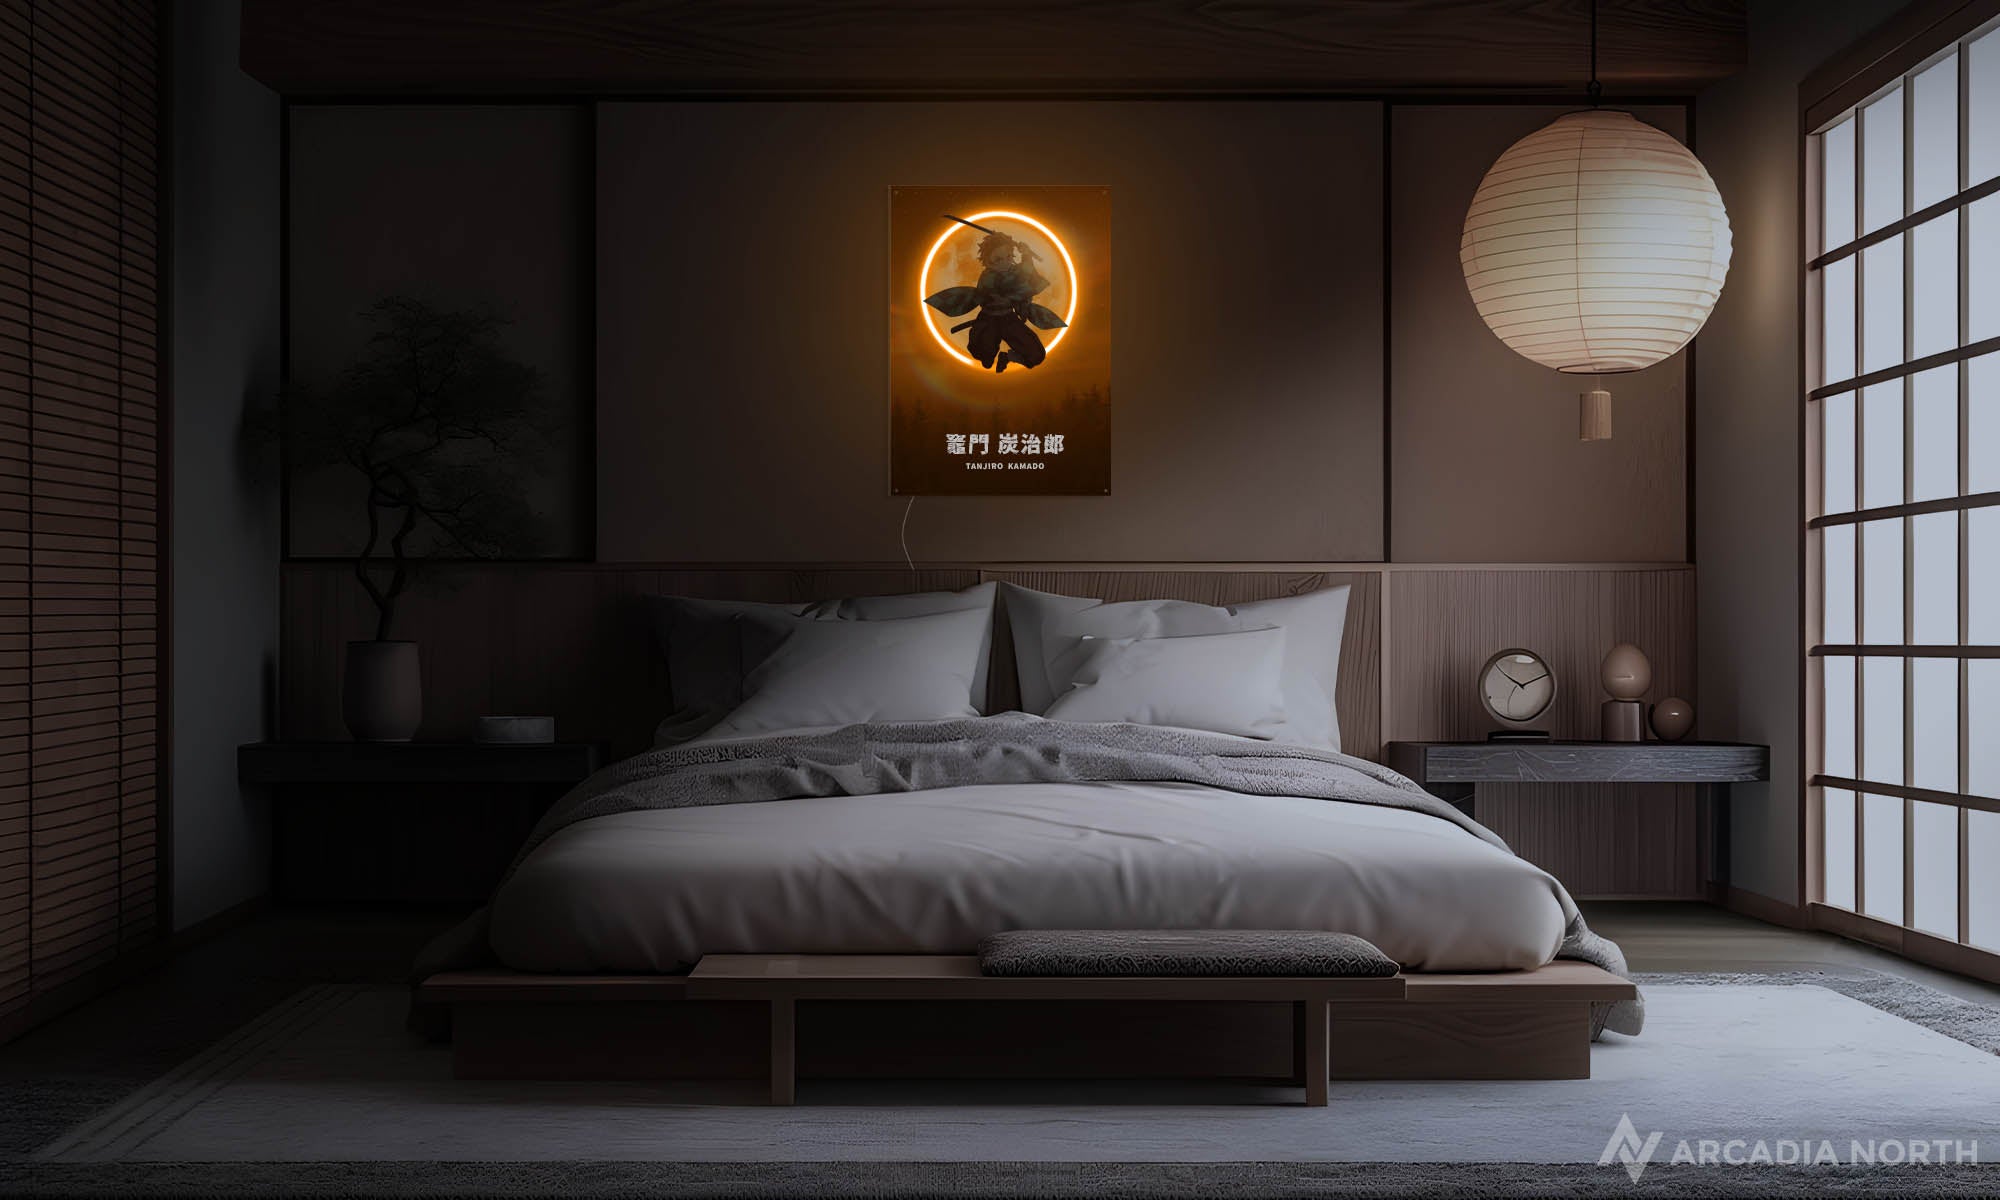 Modern Japanese bedroom with a Demon Slayer Kimetsu no Yaiba anime poster on the wall depicting Tanjiro Kamado in front of the moon outlined with glowing neon LED light - UV printed on acrylic - an Arcadia North Original LED Poster